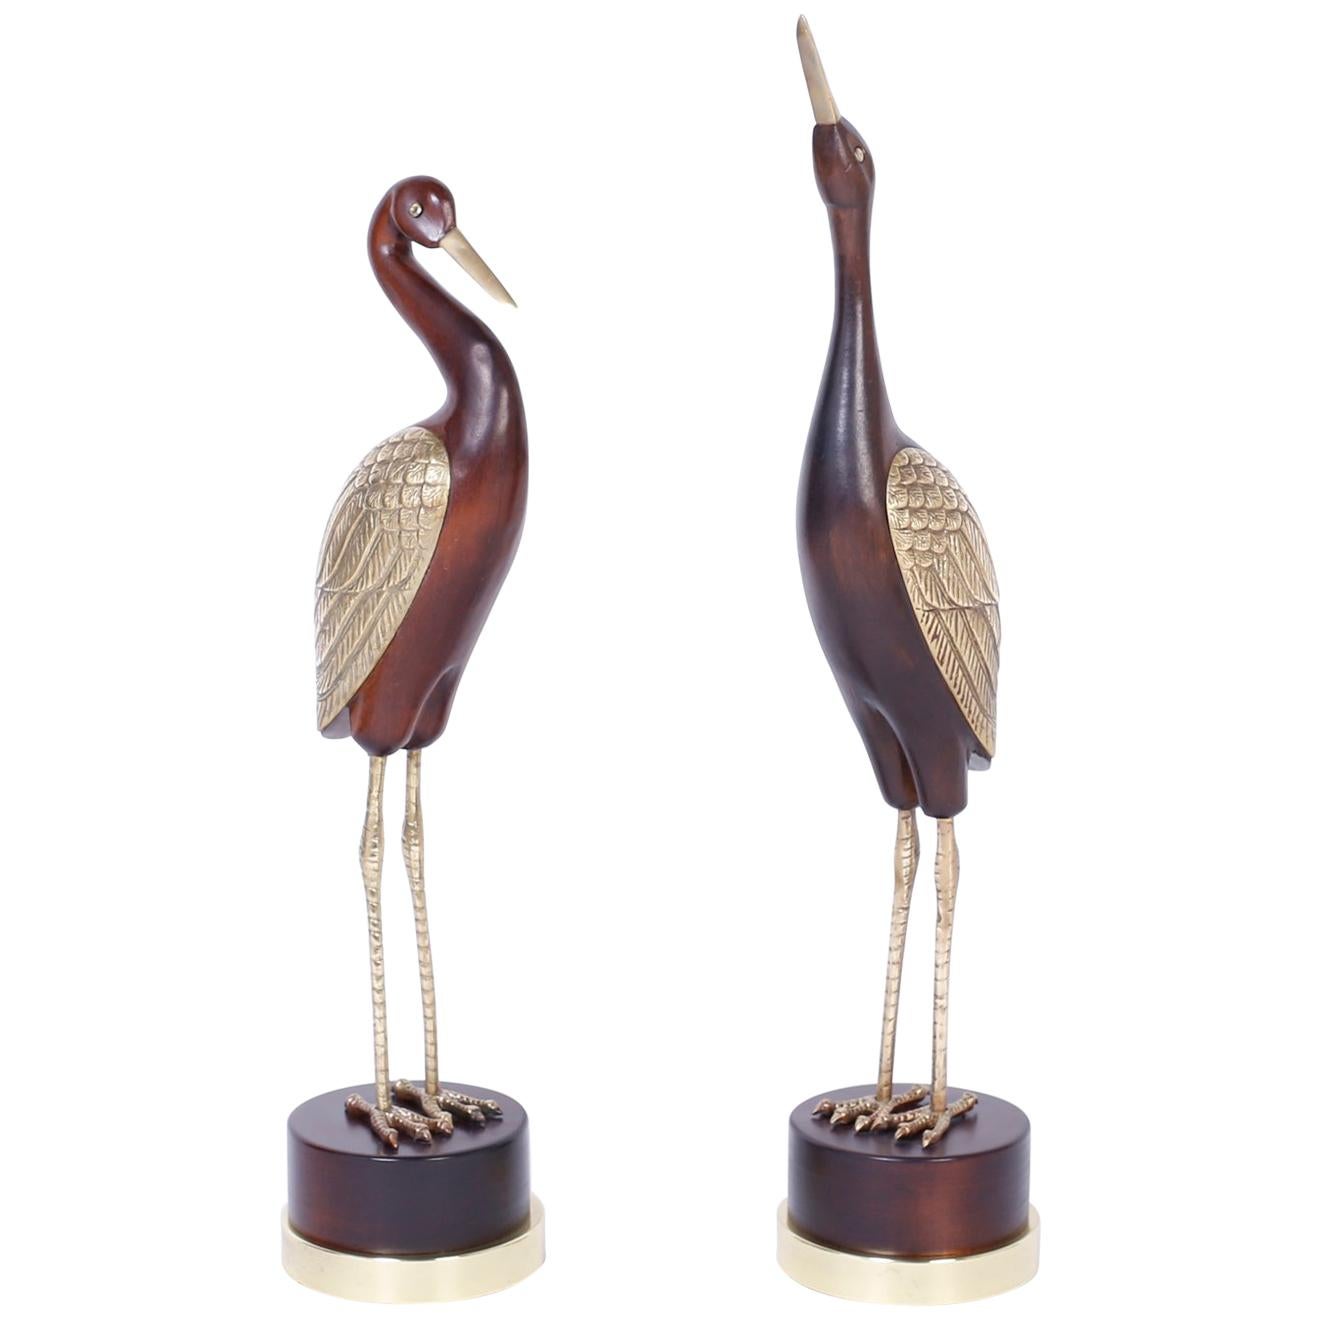 Pair of Midcentury Wood and Brass Birds or Storks